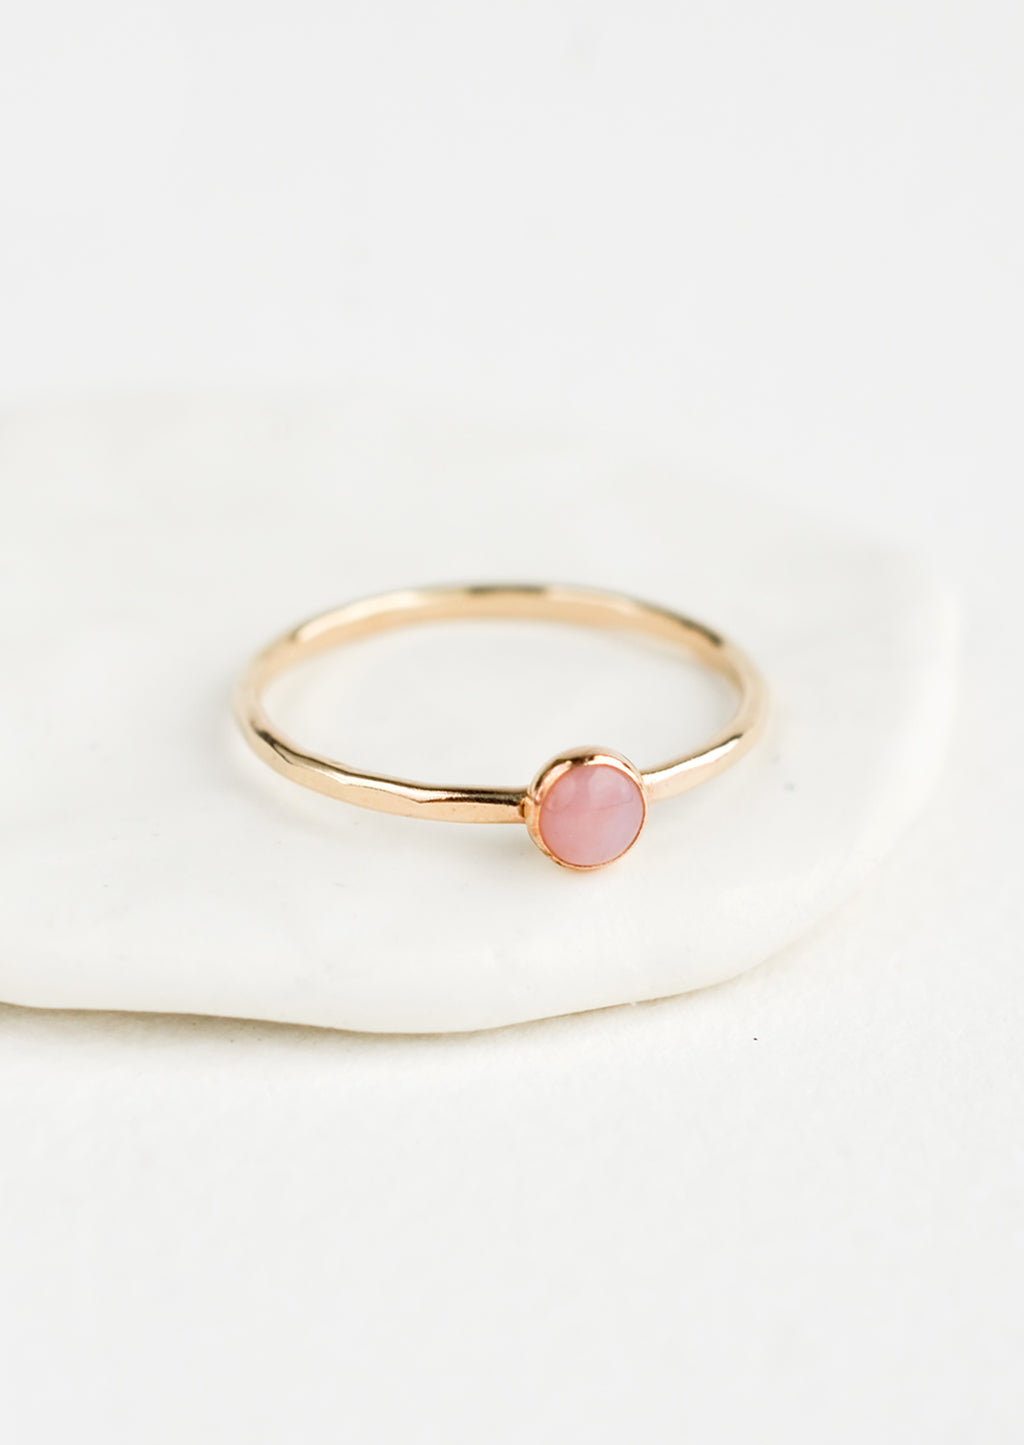 Pink Opal / Size 5: Thin gold ring with bezel set pink stone.